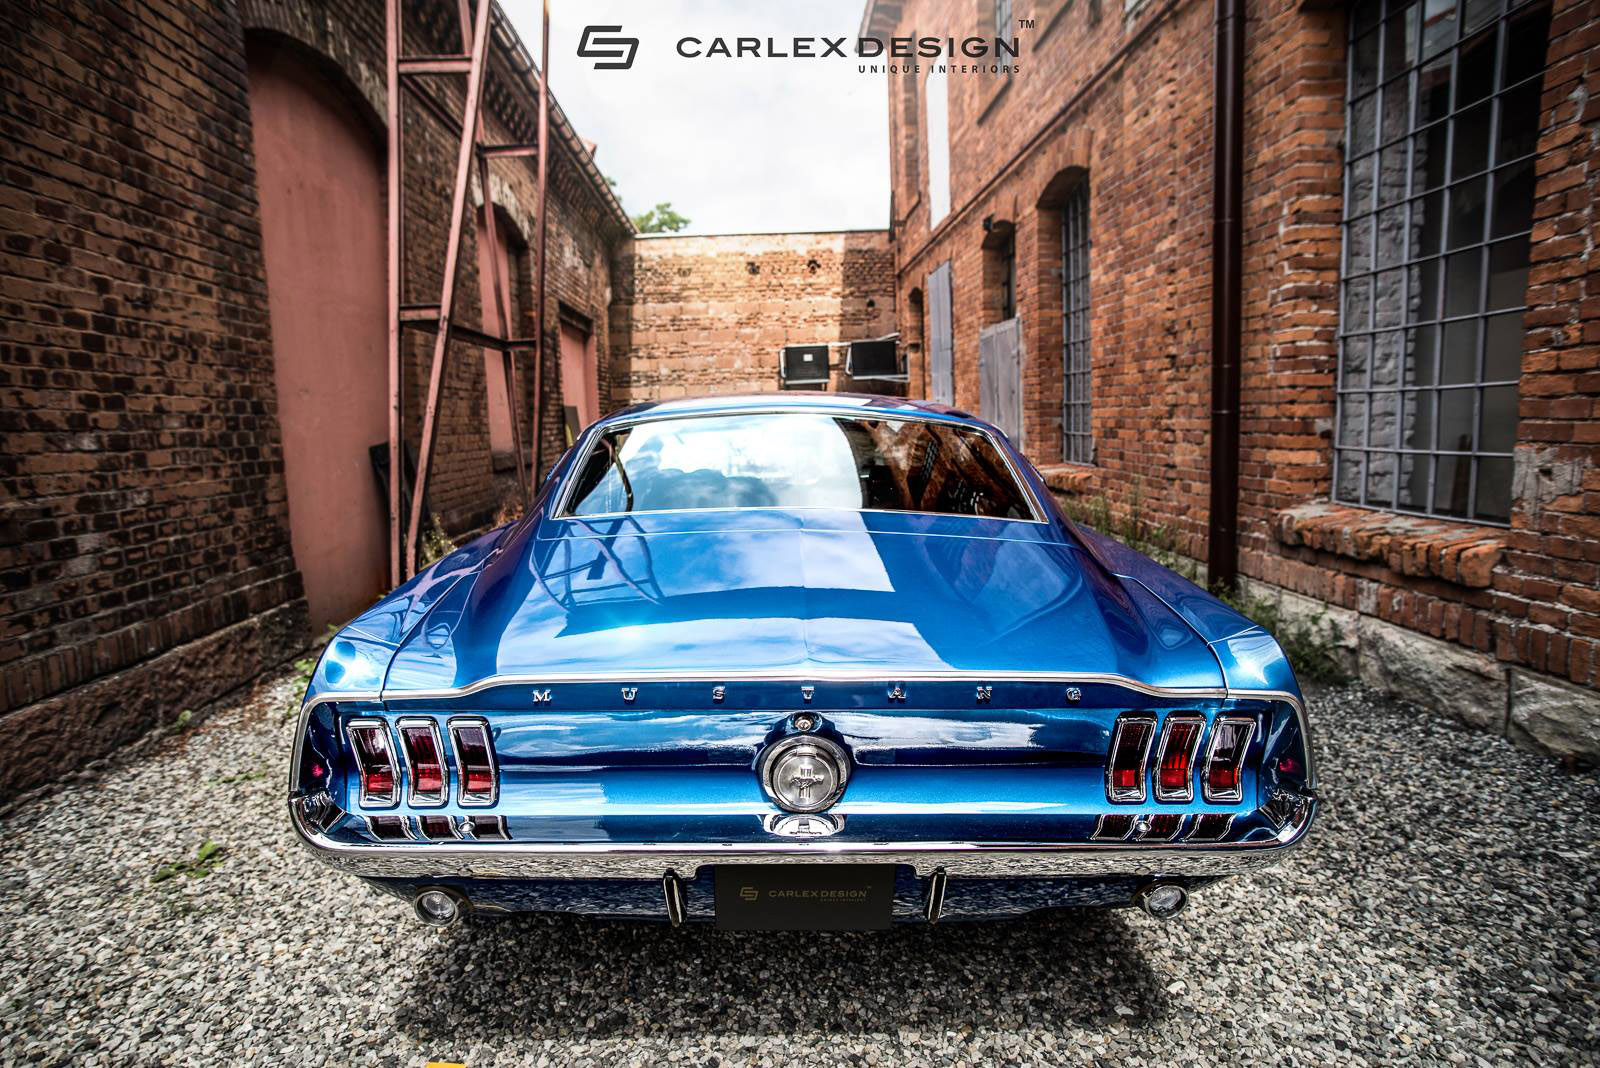 Ford Mustang Fastback by Carlex Design